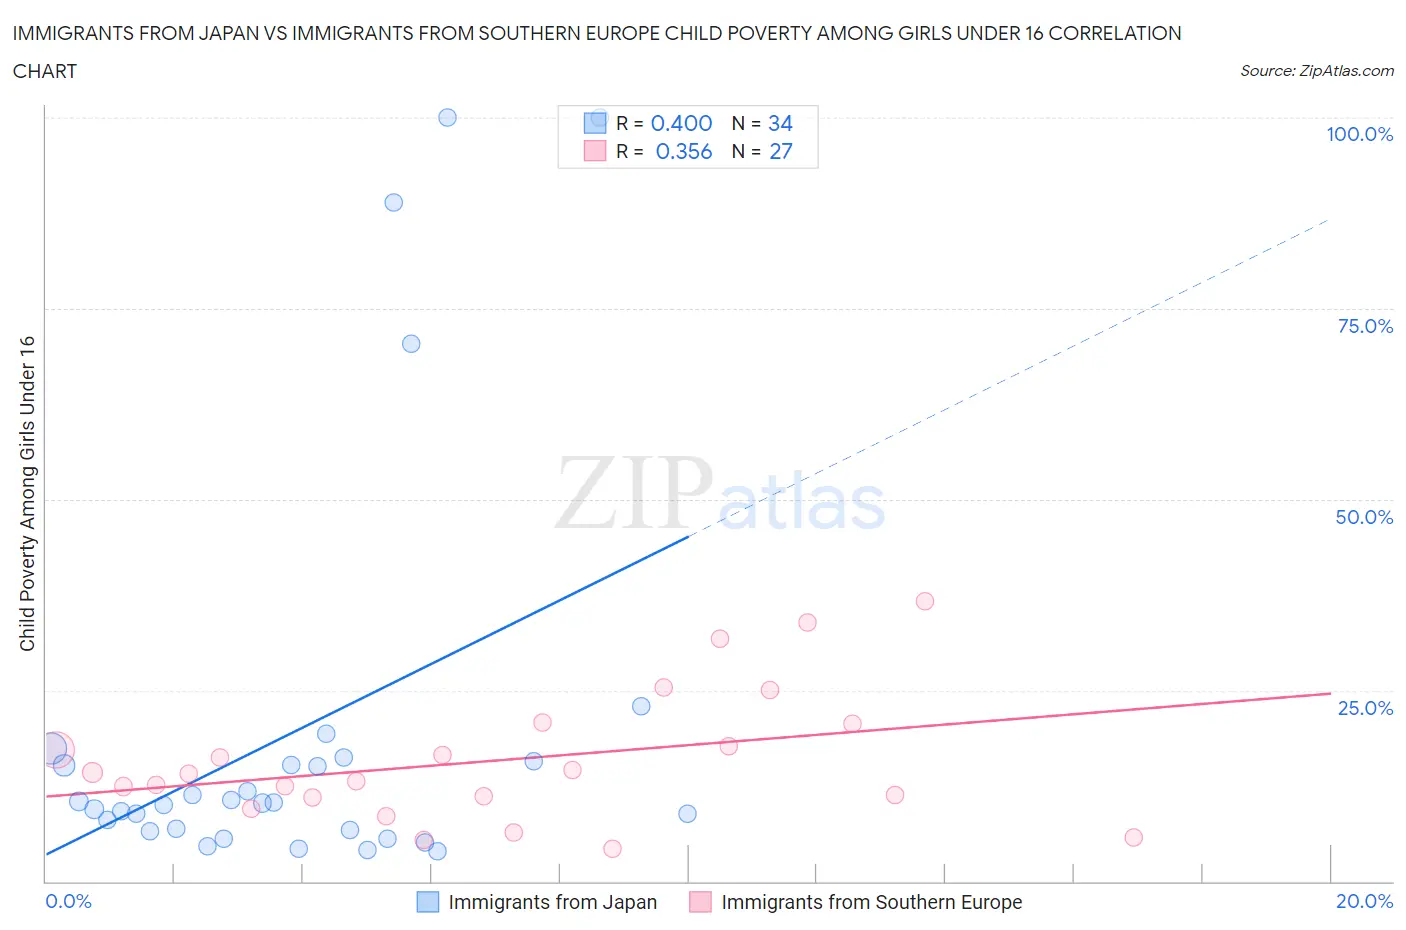 Immigrants from Japan vs Immigrants from Southern Europe Child Poverty Among Girls Under 16